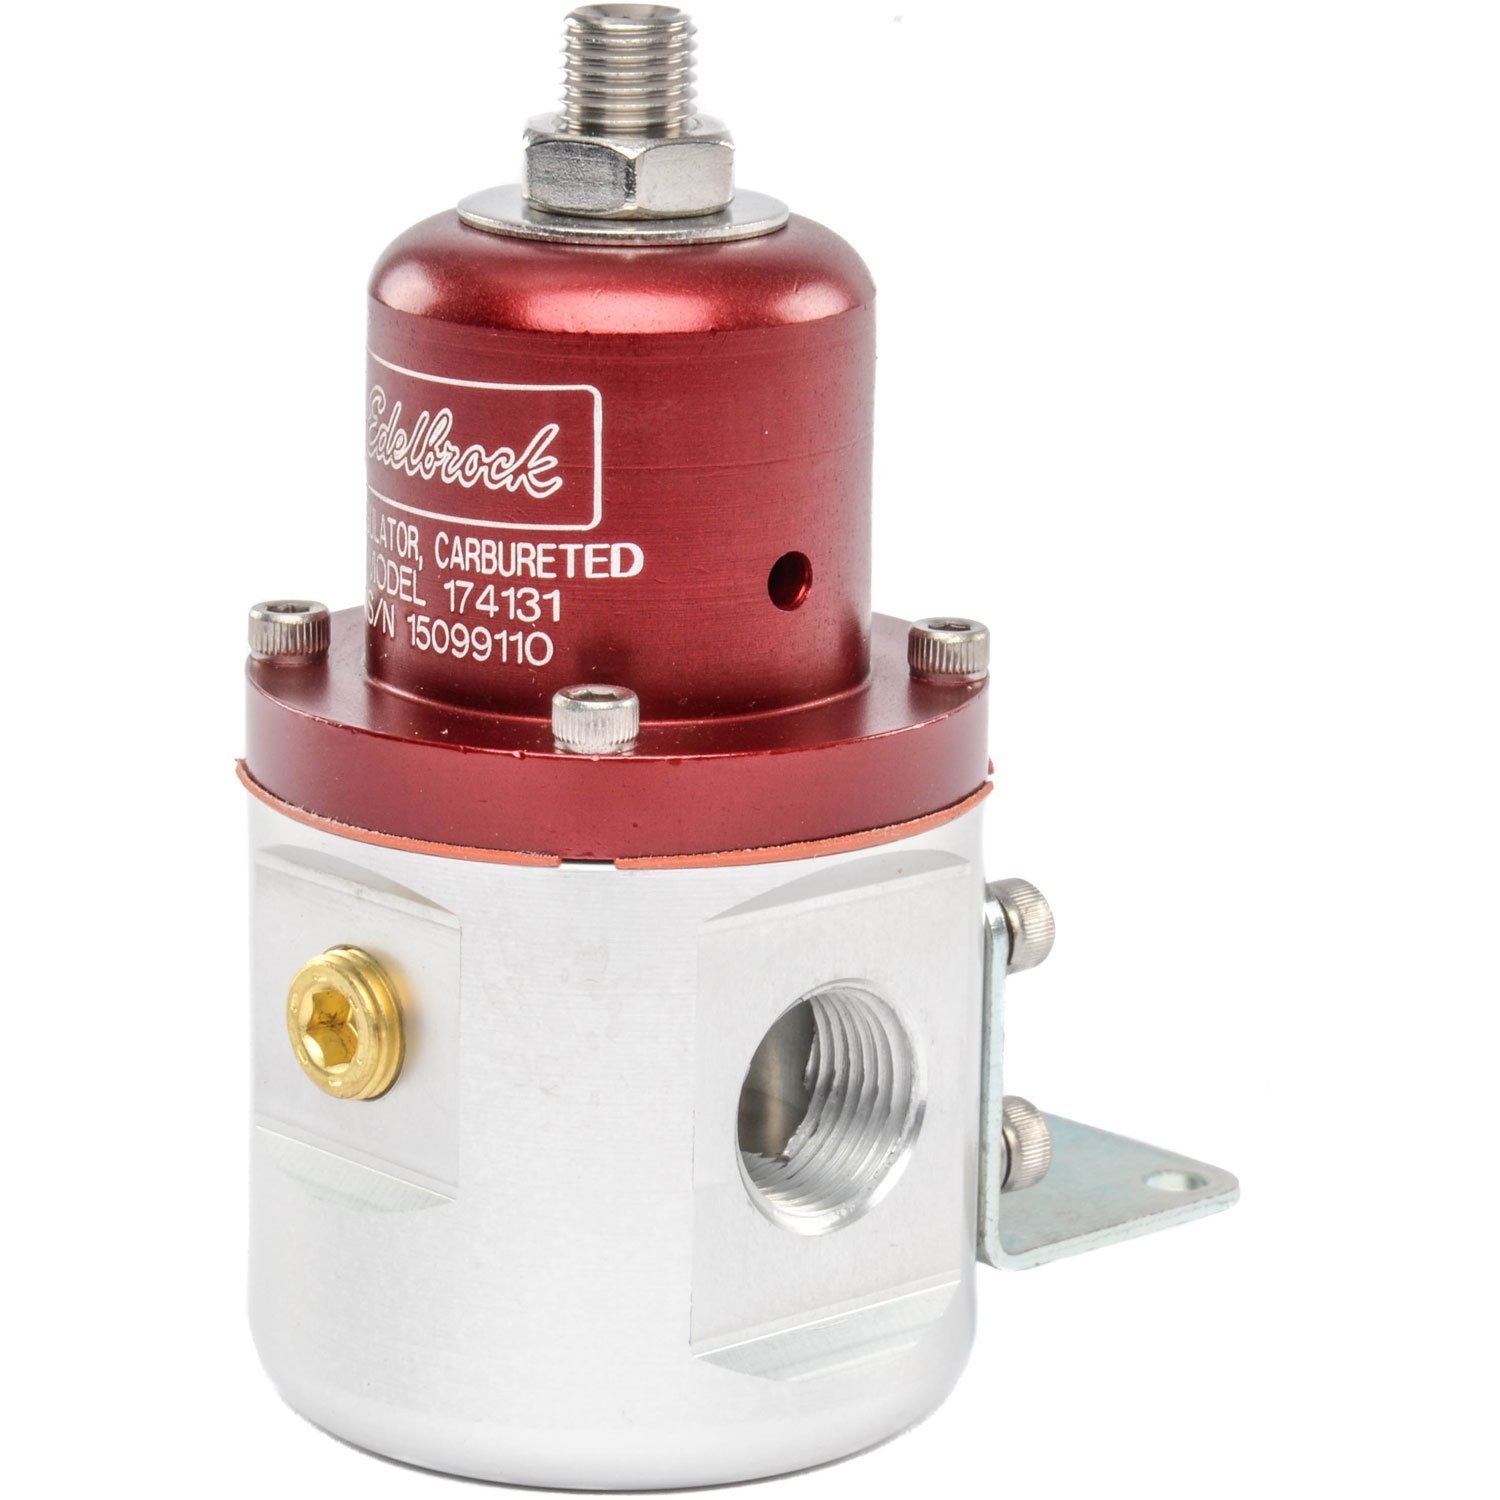 Carbureted Adjustable Bypass Fuel Pressure Regulator 160 GPH with 3/8" NPT Inlet/Outlet/Bypass in Red Finish